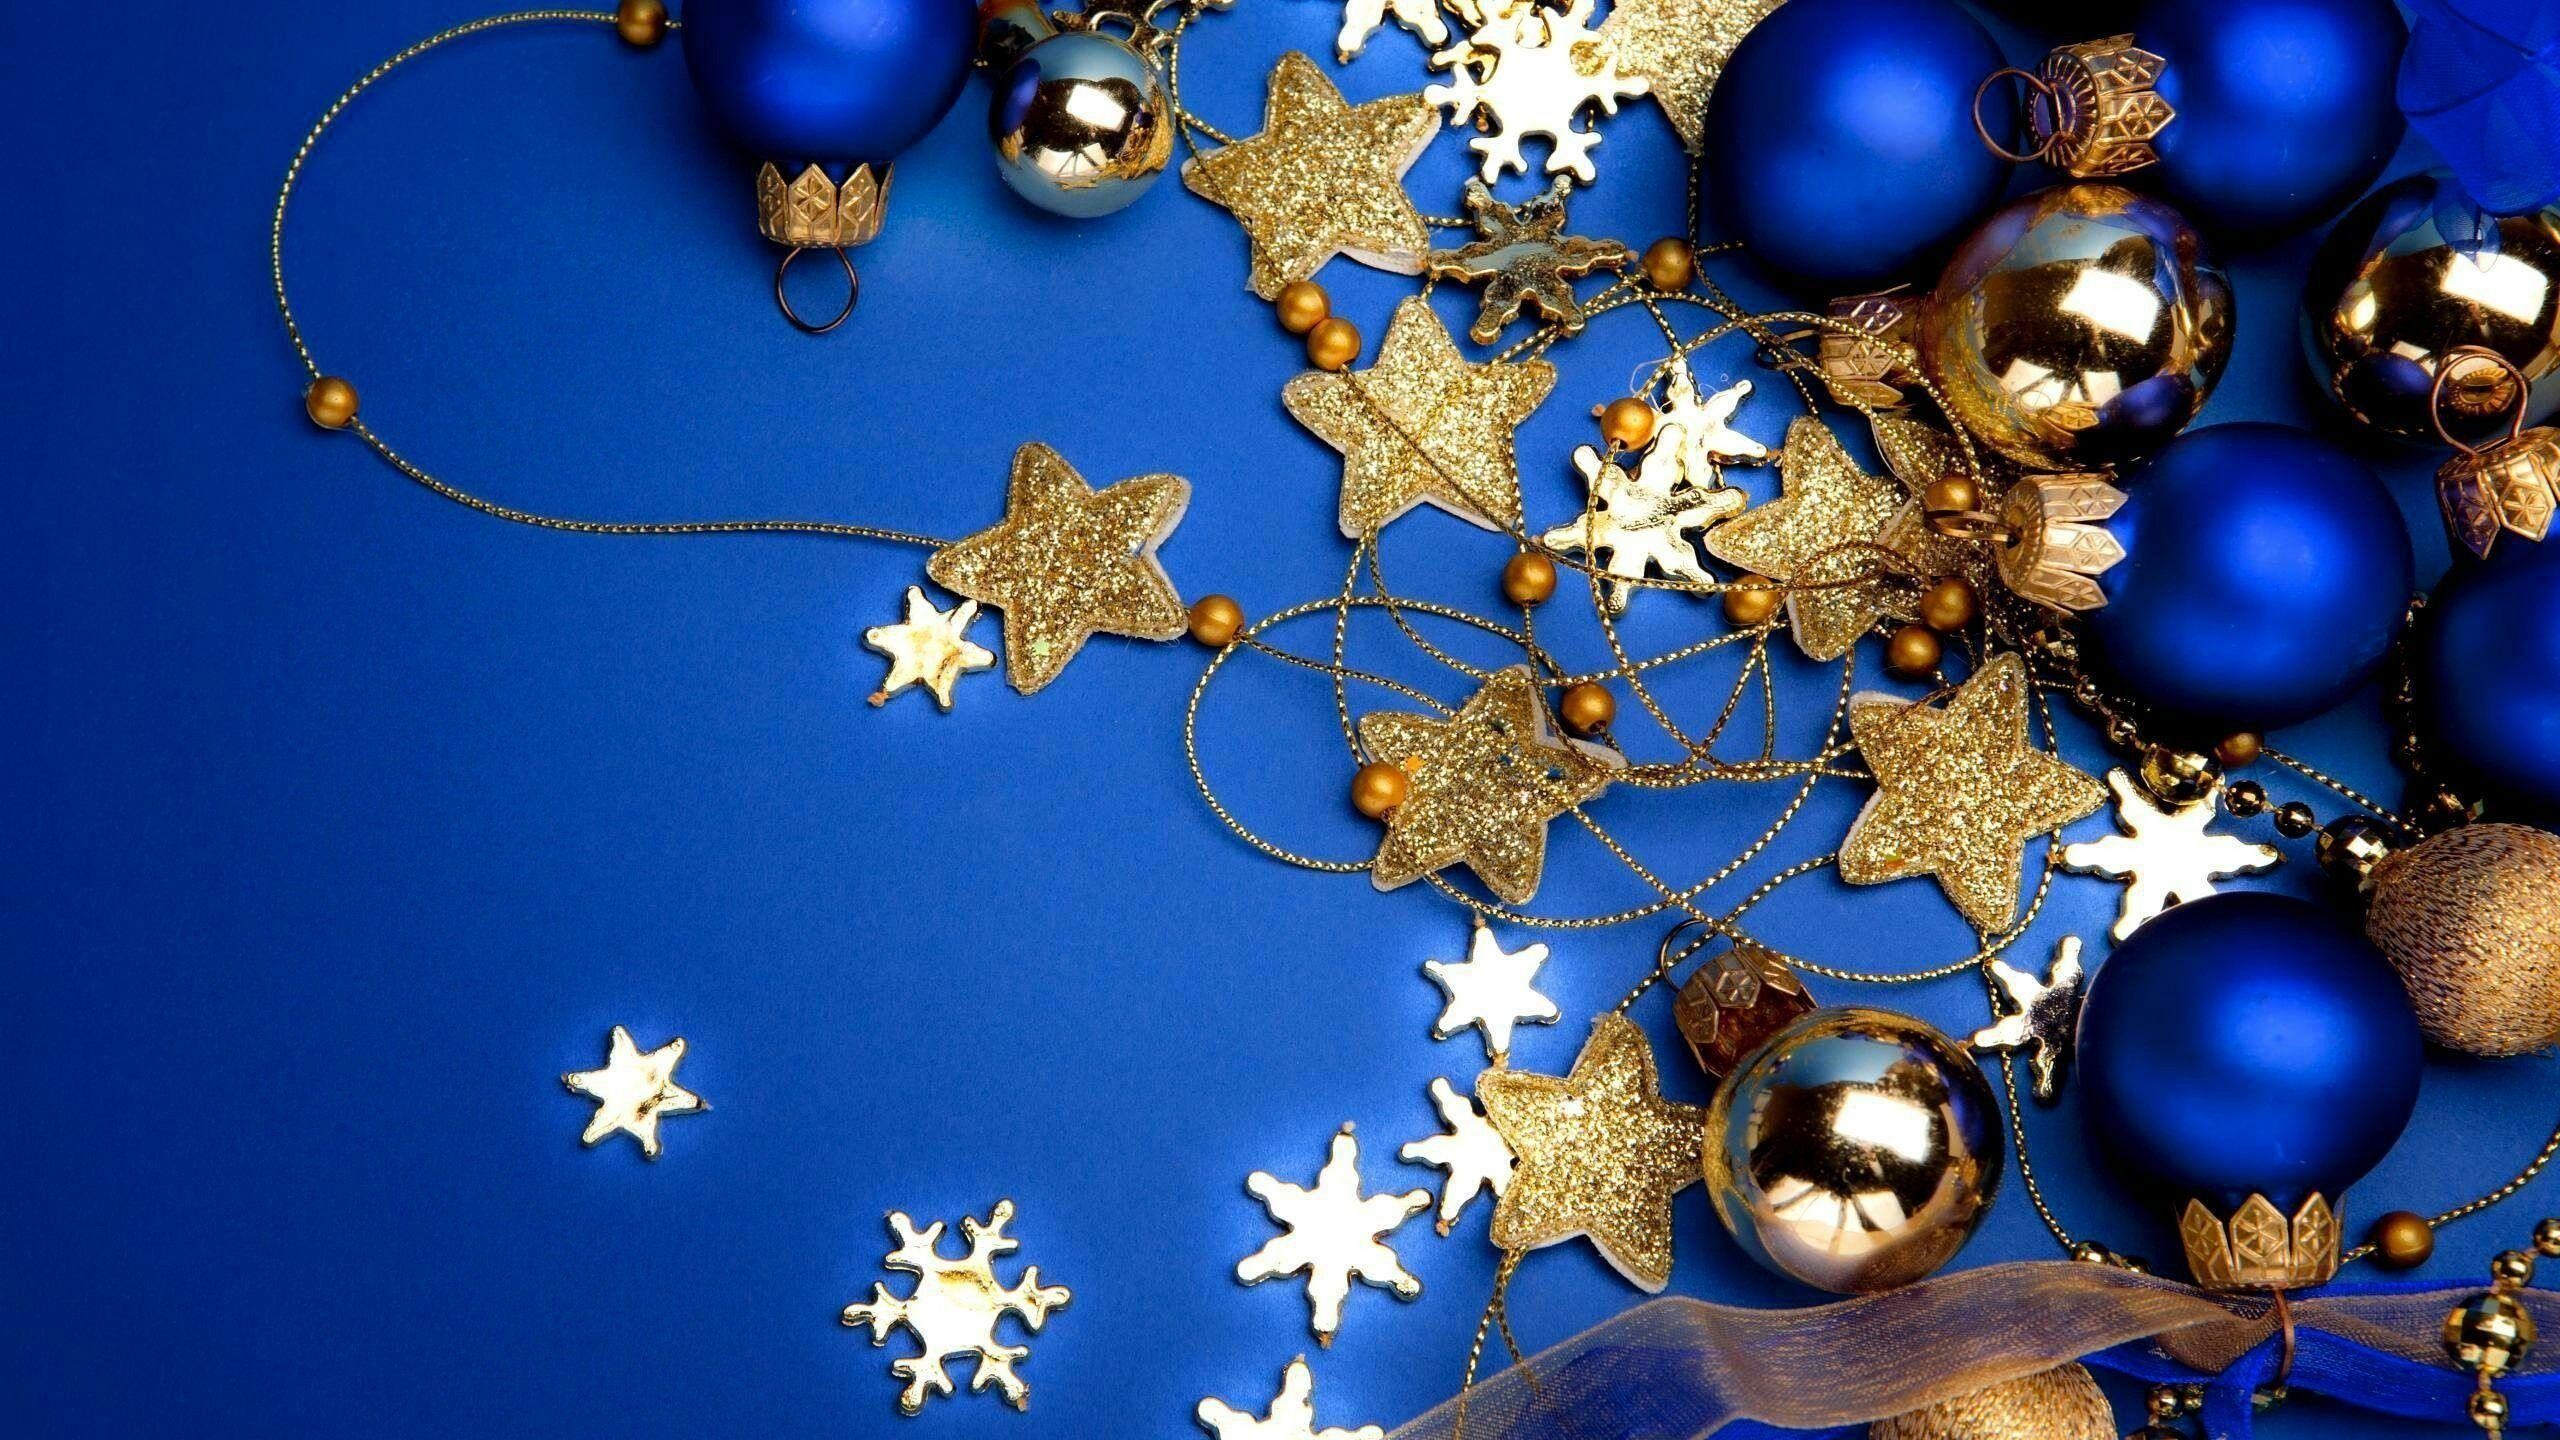 Christmas Ornament: Sparking stars, Snowflakes, Festive. 2560x1440 HD Background.